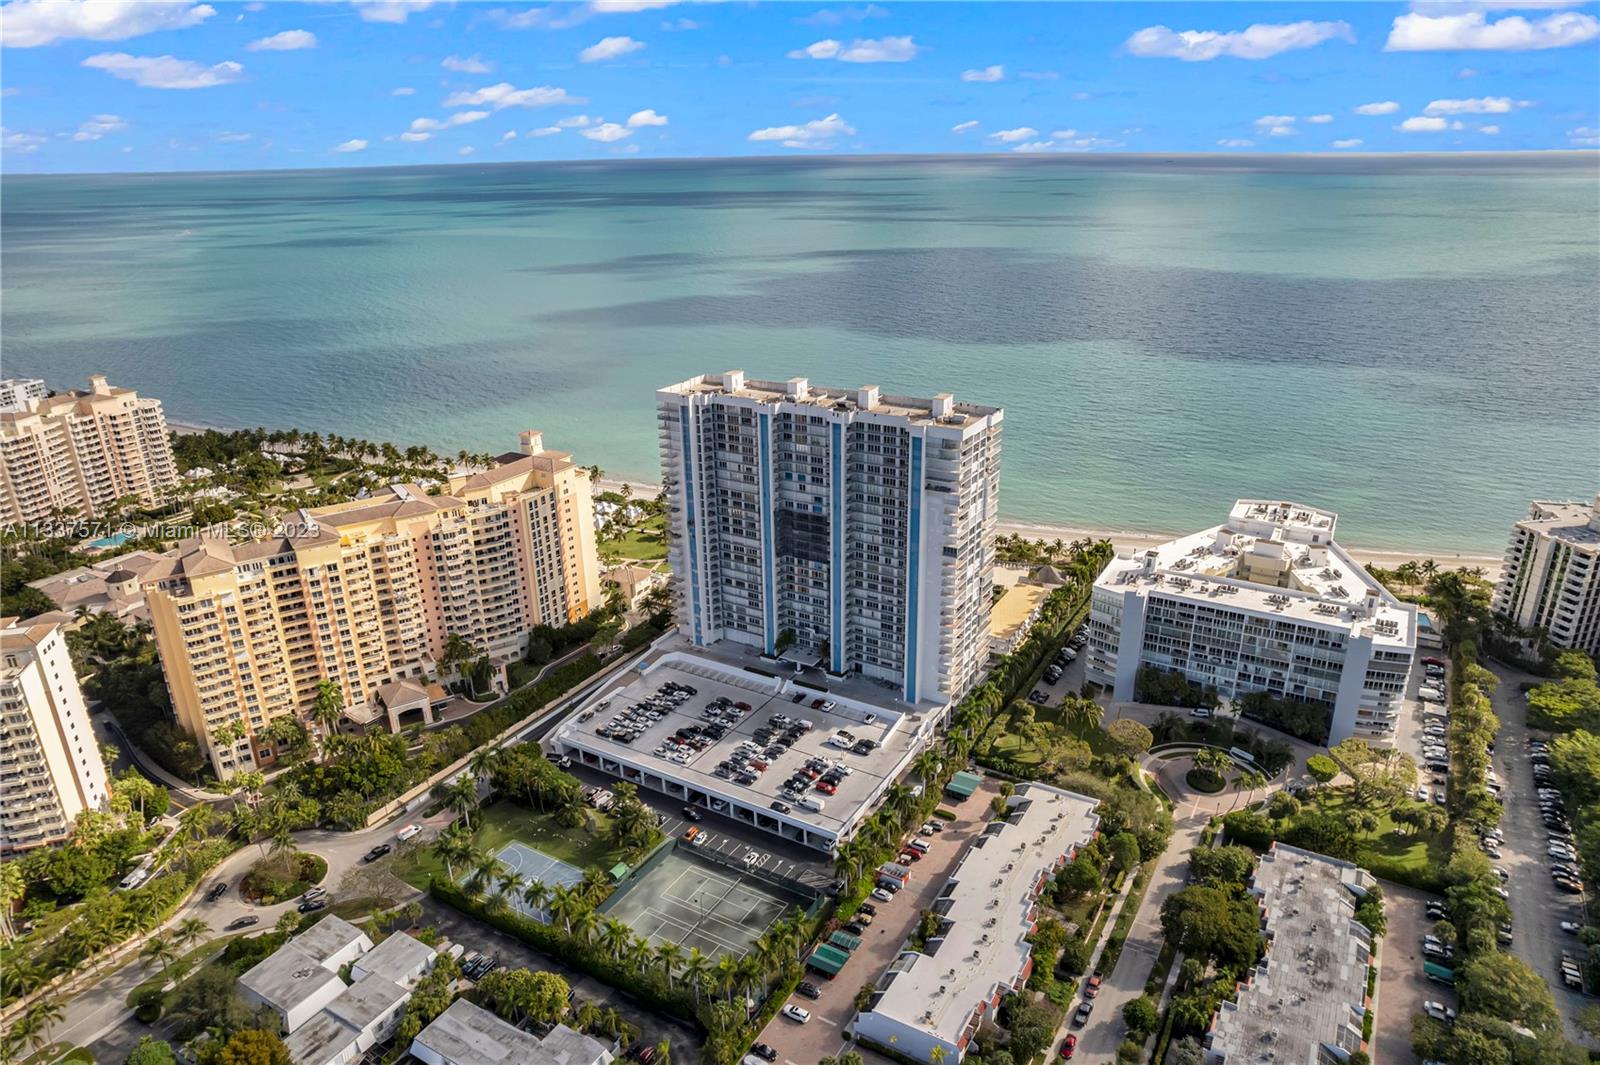 ********************** KEY BISCAYNE CASA DEL MAR ***********************
CONDO UNIT 2 BEDROOMS, 2 BATHS WITH DIRECT OCEAN & POOL VIEWS, INTERCOASTAL VIEWS FROM MASTER BEDROOM & 2ND BEDROOM. SPACIOUS LIVING AREA THROUGHOUT, EXTRA SMALL ROOM WHICH MAY BE USED AS DEN/OFFICE SPACE. OPEN FLOOR WITH BREAKFAST LIVING & BREAKFAST AREA. MARBLE FLOORS THROUGHOUT, MASTER & 2ND BEDROOM WITH BUILT-IN CLOSETS. LARGE LAUNDRY ROOM WITH WASHER/DRYER WITH 2ND ENTRY TO UNIT. PRIVATE FOYER ENTRANCE WITH ONLY 1 NEIGHBOR. 1 ASSIGNED PARKING SPACE NEAR ELEVATOR. FULL-SERVICE BUILDING INCLUDES POOL, LIGHTED TENNIS COURTS & BASKETBALL COURTS, FITNESS CENTER, GAME ROOM, SAUNA, LIBRARY,24-HOUR SECURITY, GUARD ENTRANCE, LOBBY ATTENDANT, PIRVATE ACCESS TO BEACH. SELLER TO PAY ASSESSMENT IN FULL AT CLOSING. MUST SEE!!